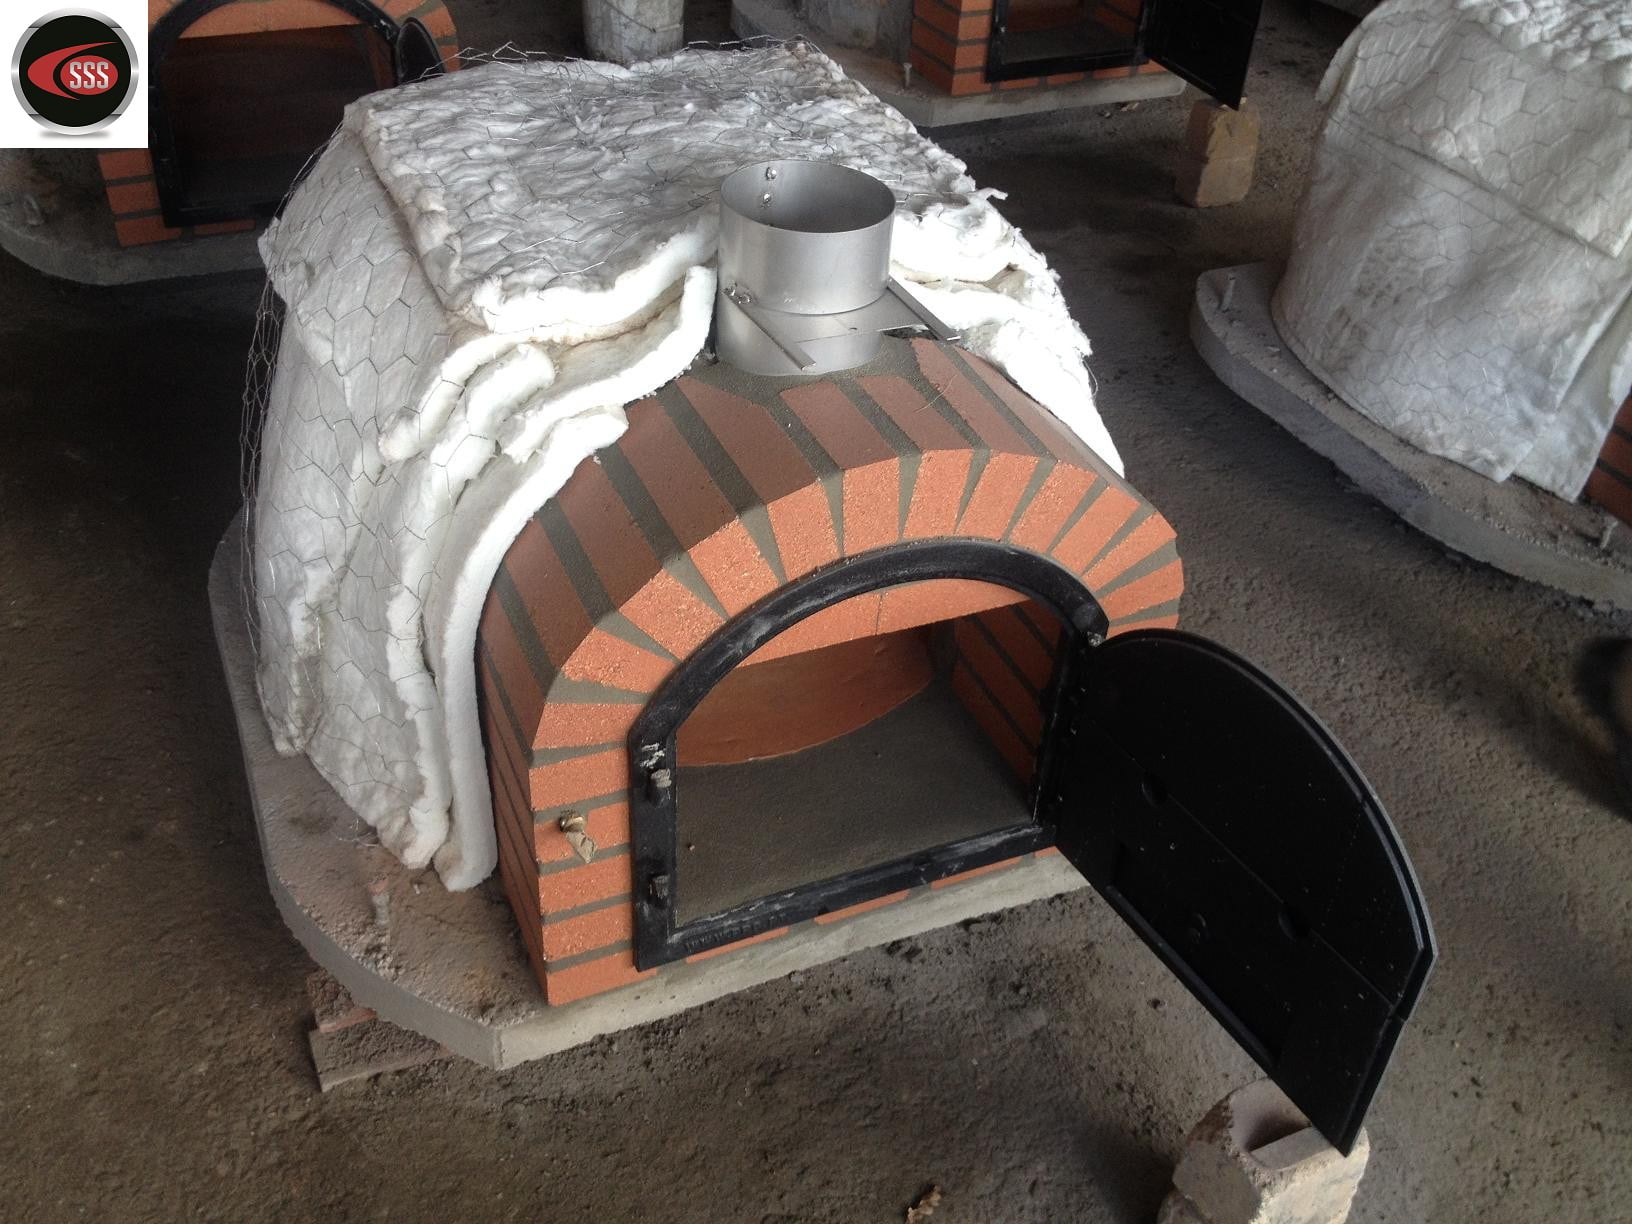 More for Ovens Forges 1 x 24 x 12.5 Axim Mica Ceramic Fiber Insulation Blanket 2400F Stoves Kilns Furnaces 